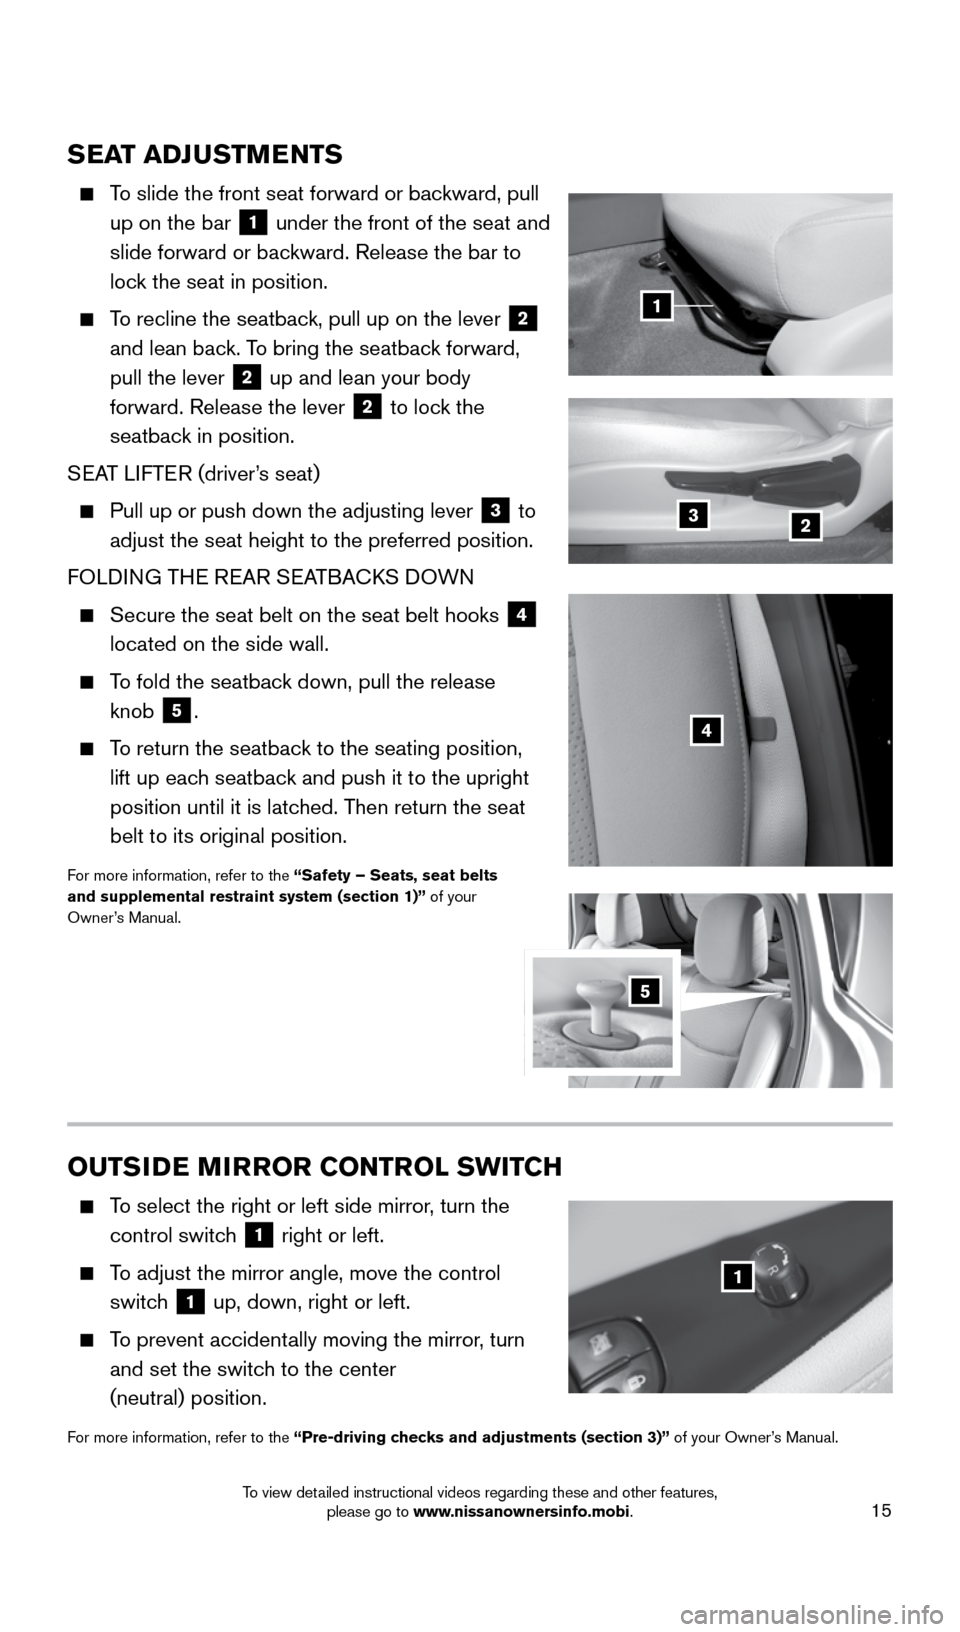 NISSAN LEAF 2016 1.G Quick Reference Guide 15
SEAT ADJUSTMENTS
    To slide the front seat forward or backward, pull 
up on the bar
 
1 under the front of the seat and 
slide forward or backward. Release the bar to 
lock the seat in position.
